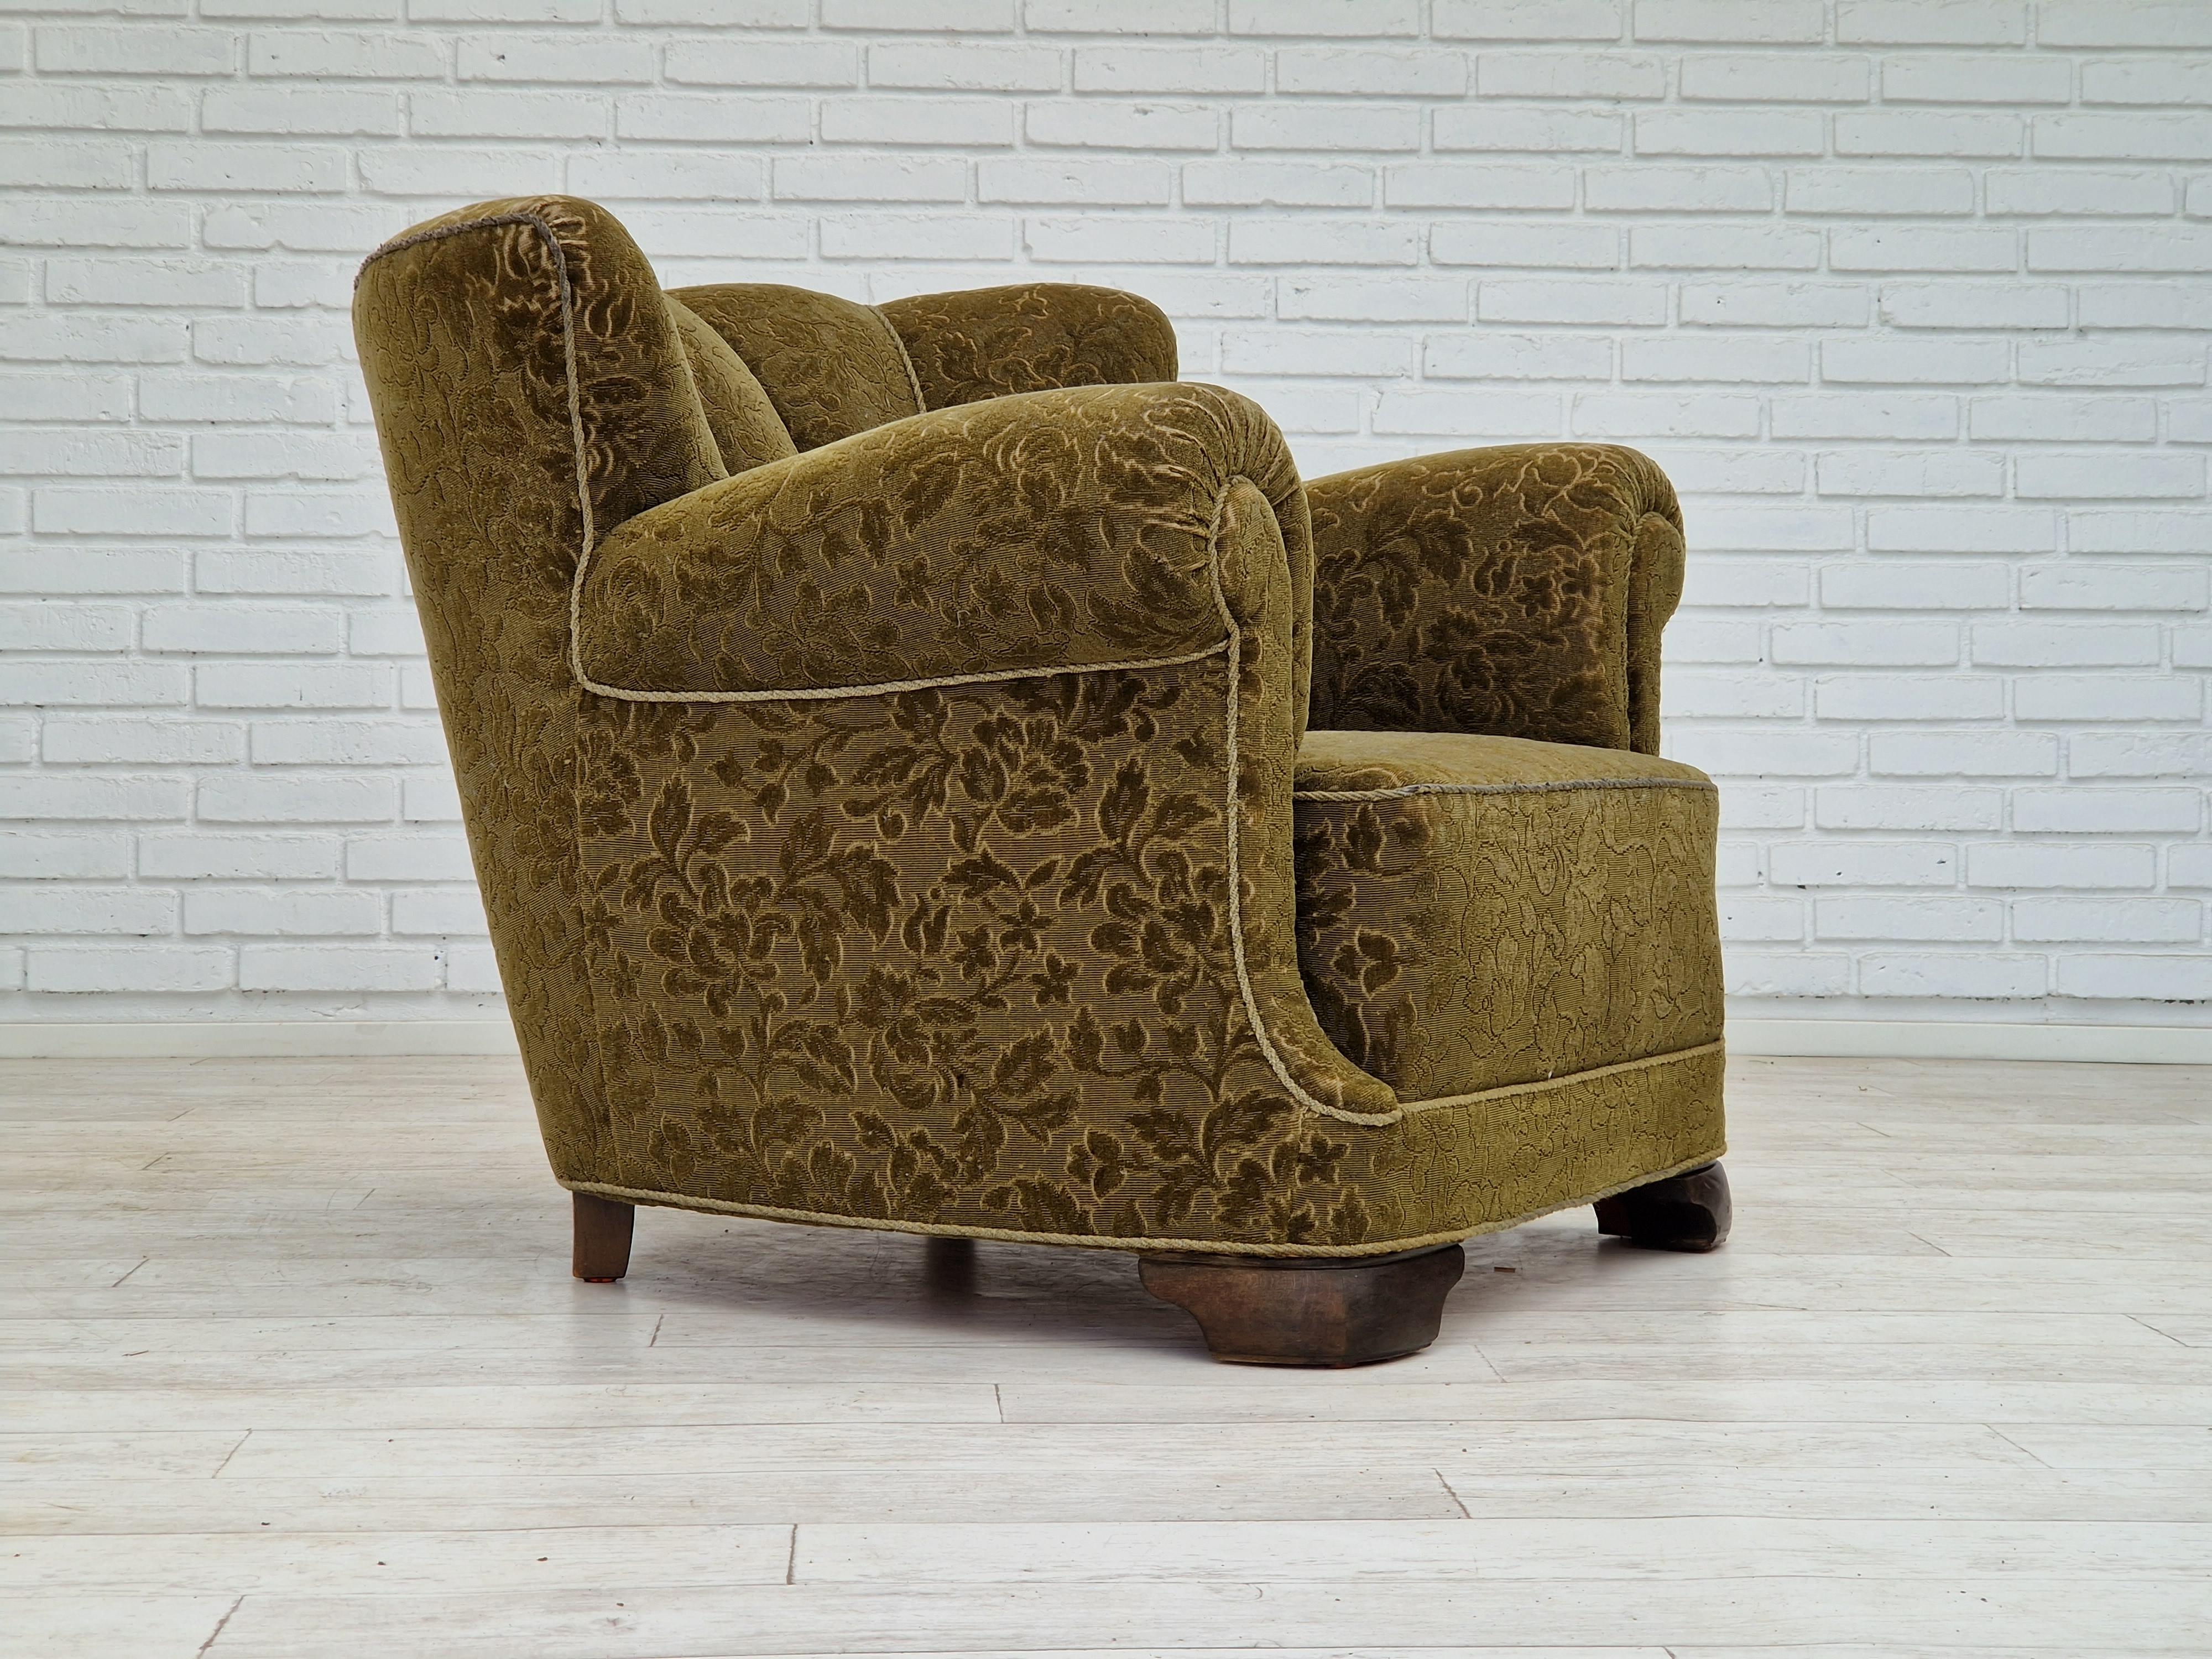 1950s, Danish design. Original relax chair in green fabric. Good condition: no smells and no stains, light wear/ patina on the top back and armrest. Brass springs in the seat. Made by Danish furniture manufacturer in about 1950-55